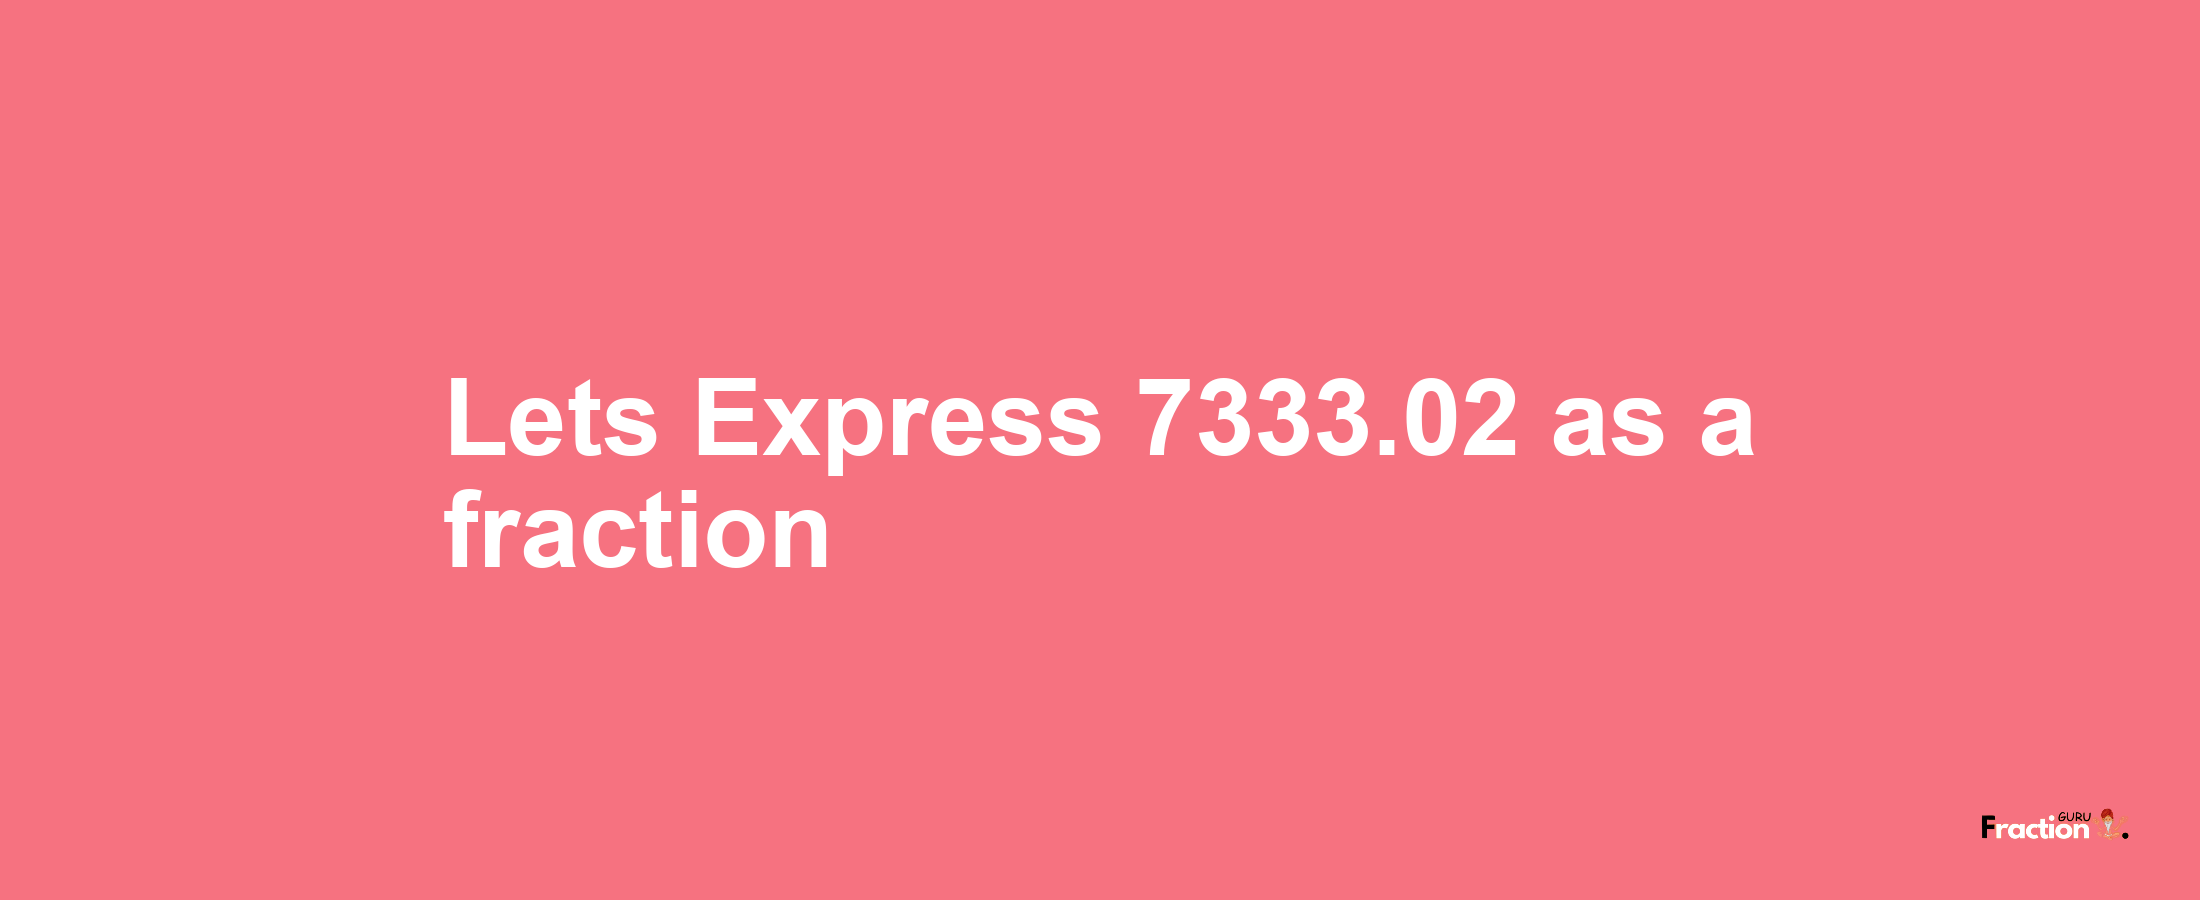 Lets Express 7333.02 as afraction